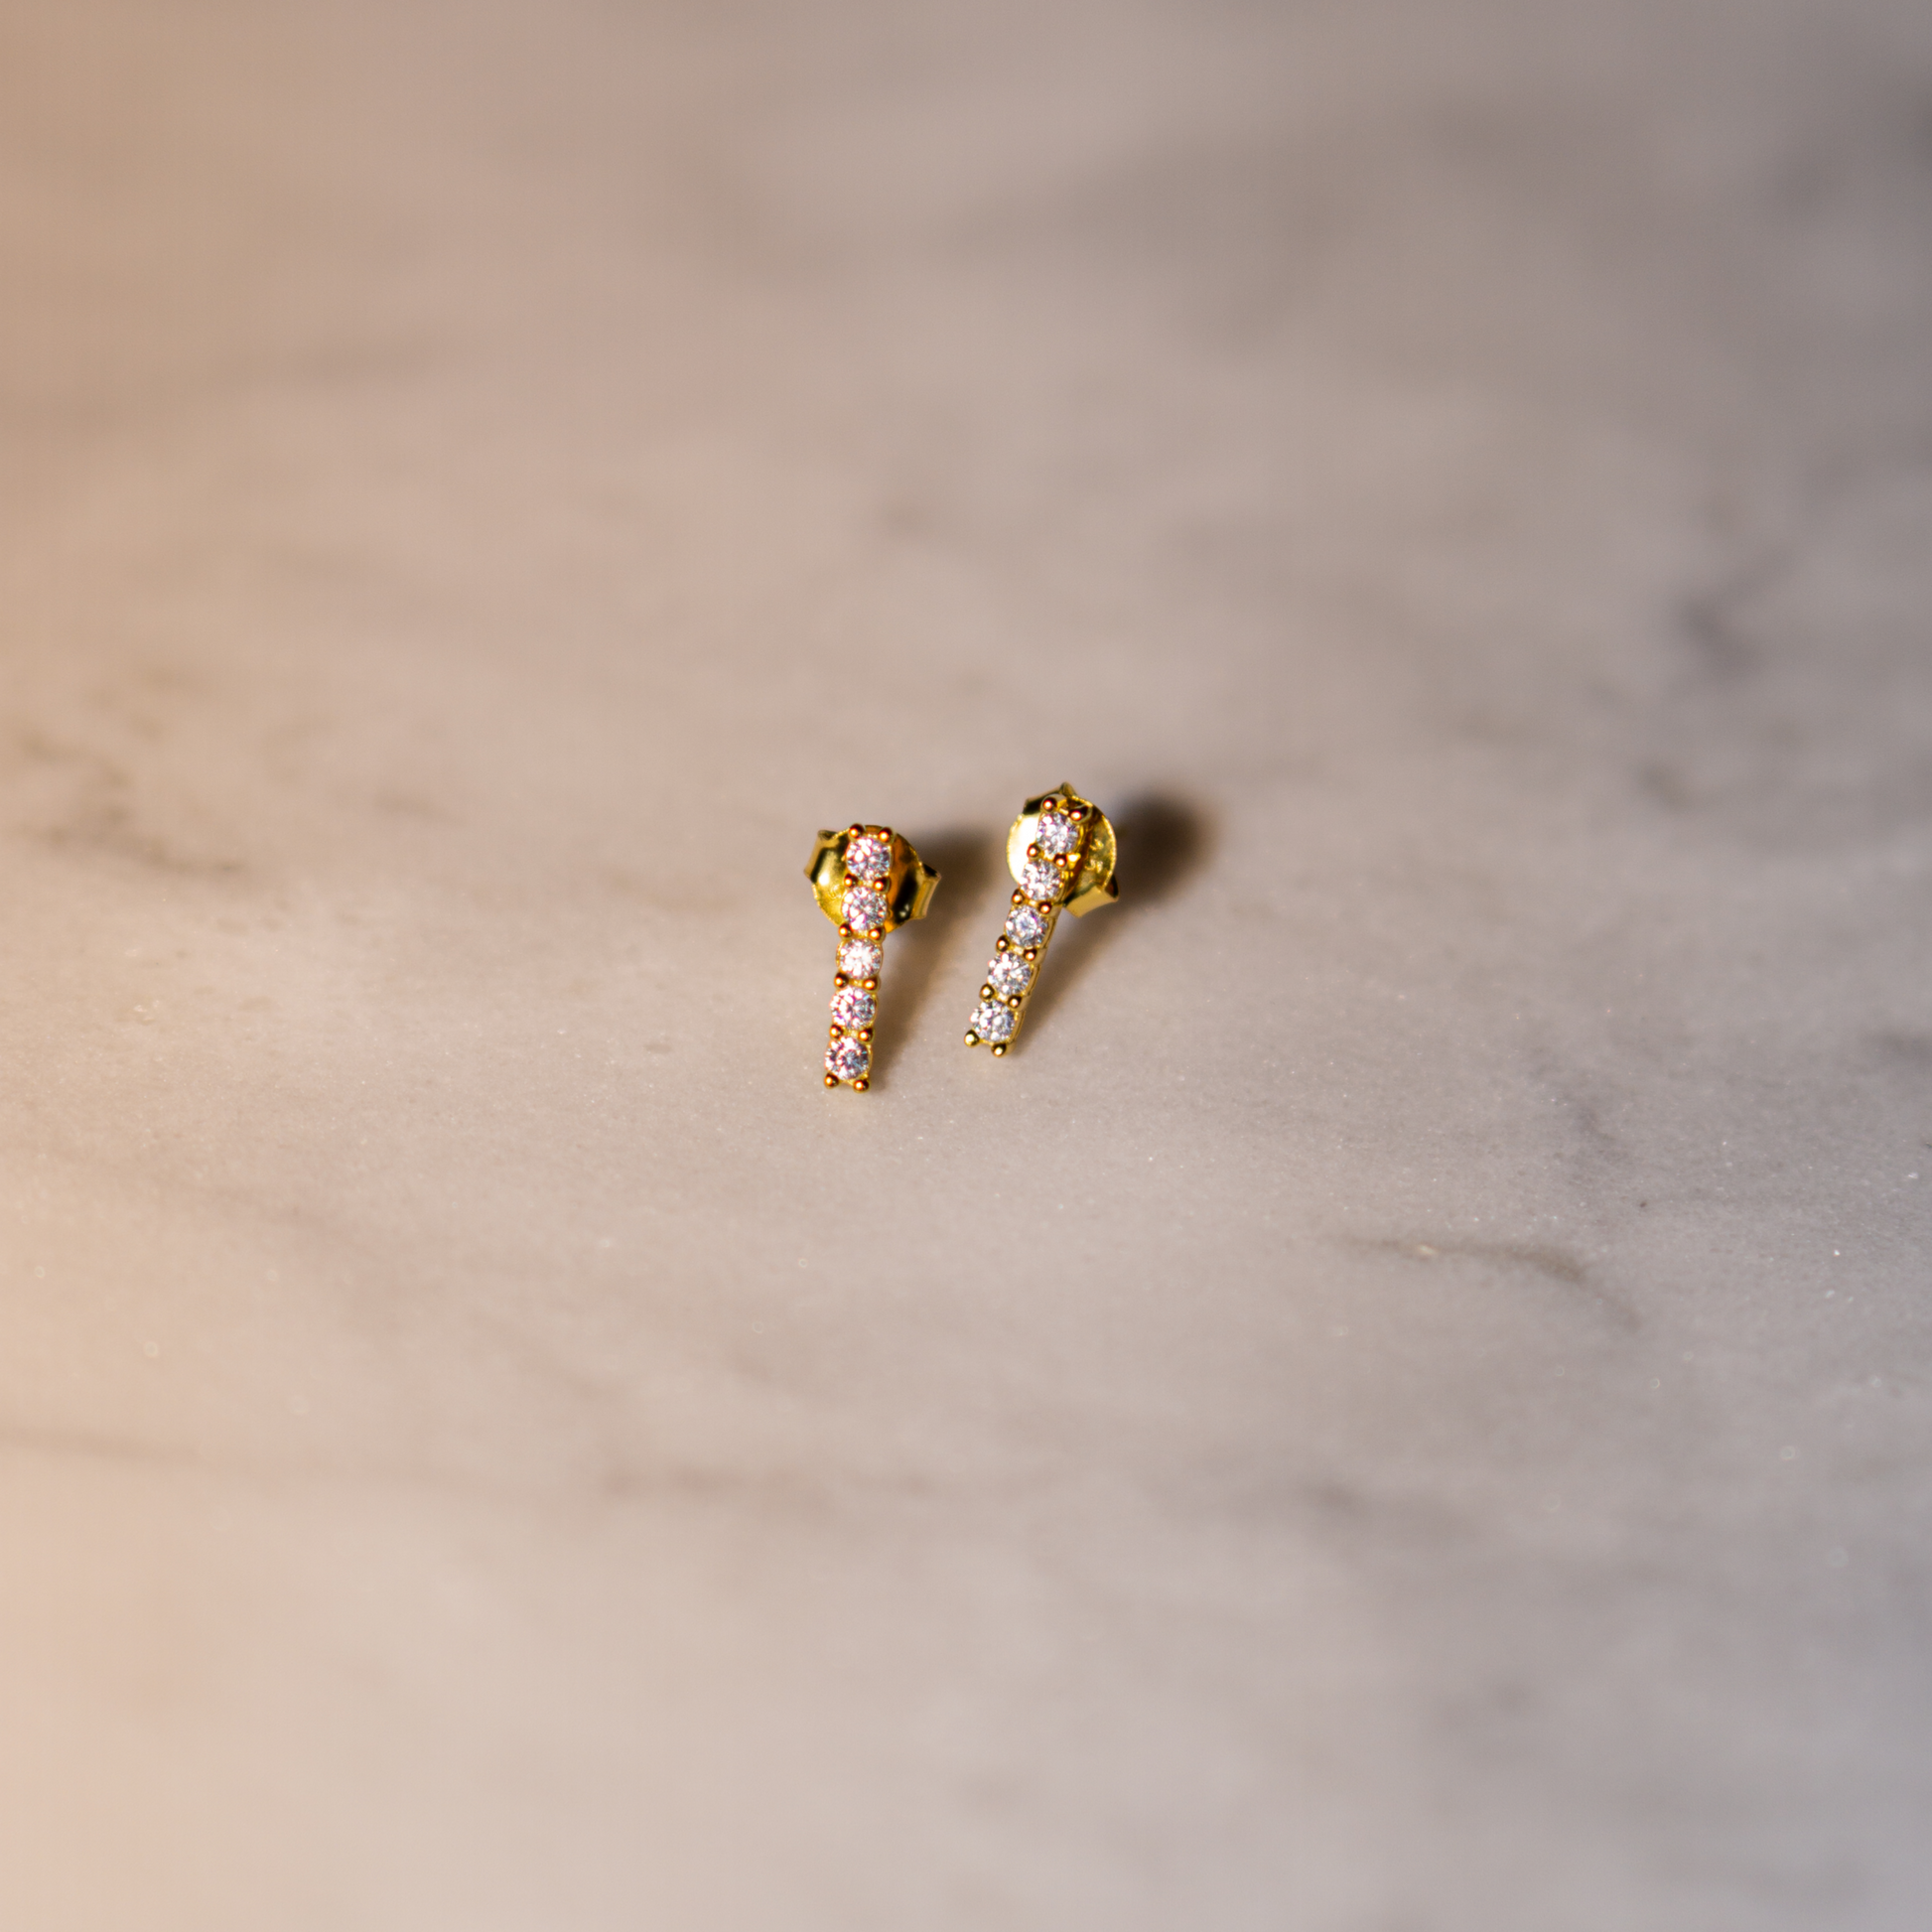 Women's and Girls 18k Gold Plated Earrings; Shiny Earrings; Simple Earrings; Rhinestone Earrings. Cubic zirconia stone earrings. Small earrings. Affordable Earrings and Jewelry; Cute Earrings; Cubic Zirconia Earrings; Small Jewelry Business. 